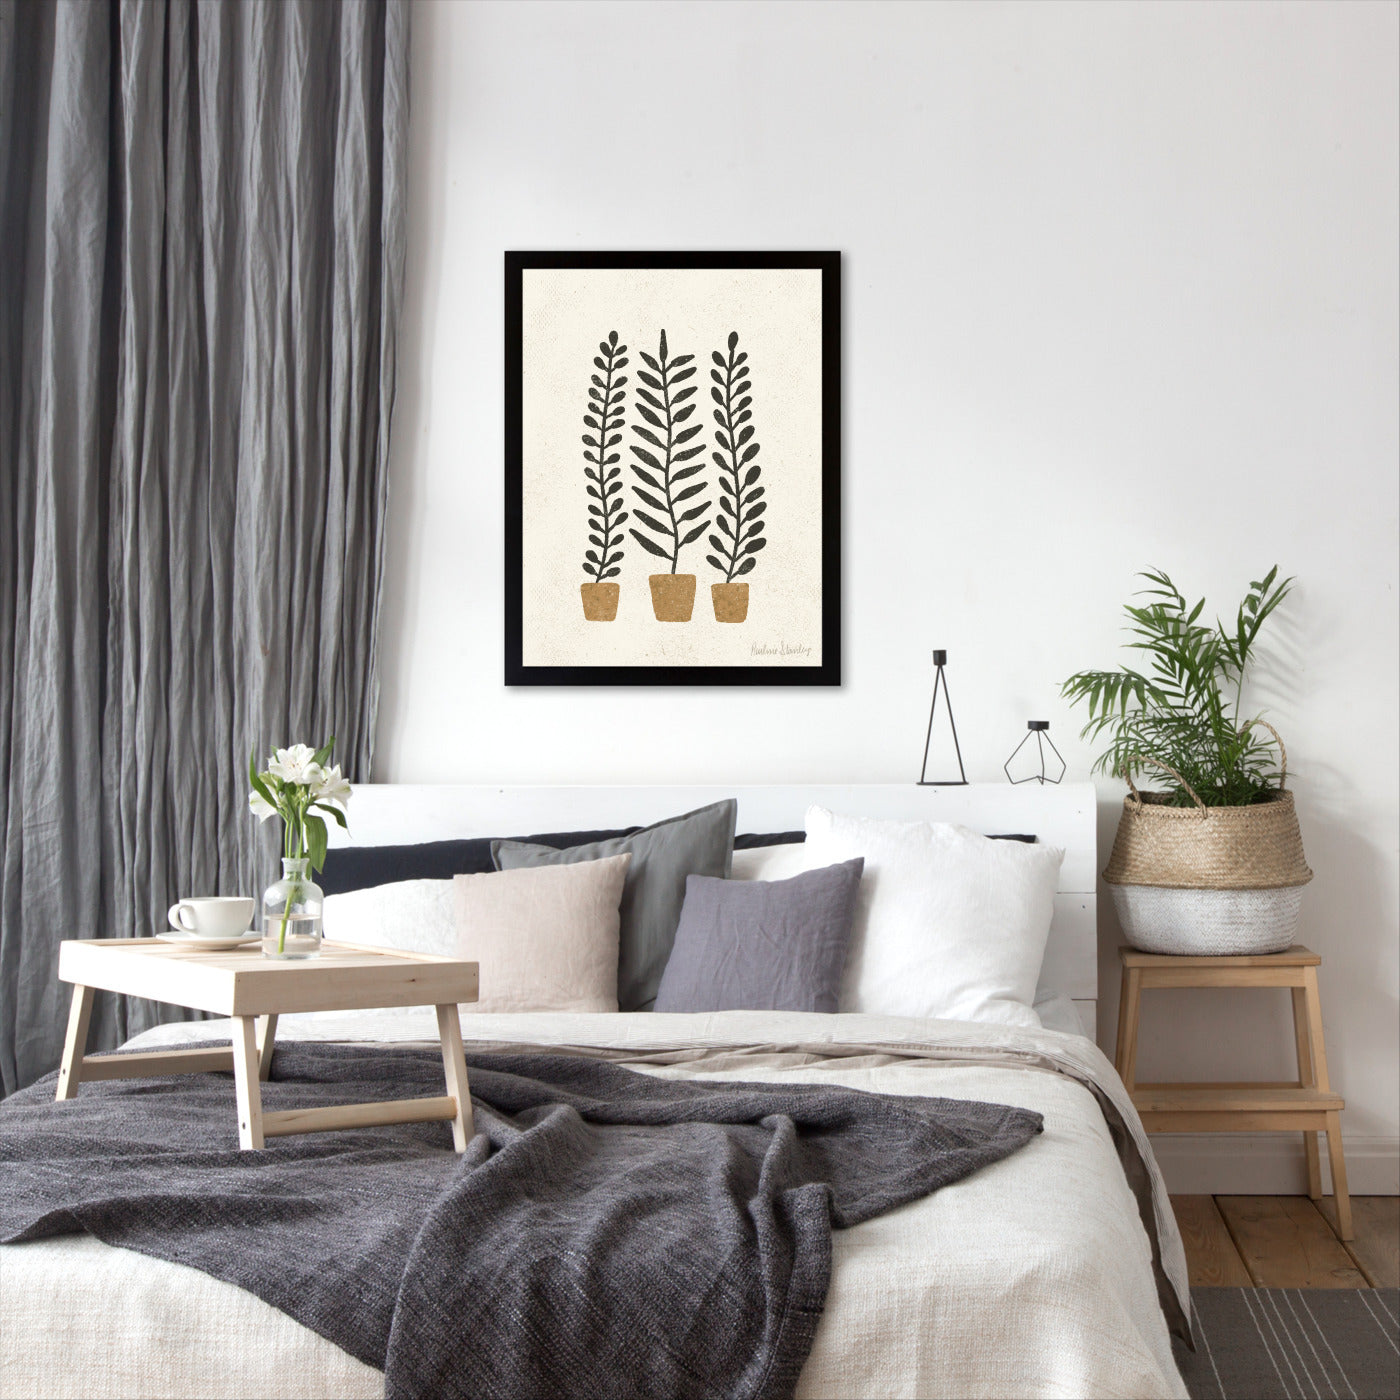 Potted Ferns Terracotta Black by Pauline Stanley - Framed Print - Americanflat